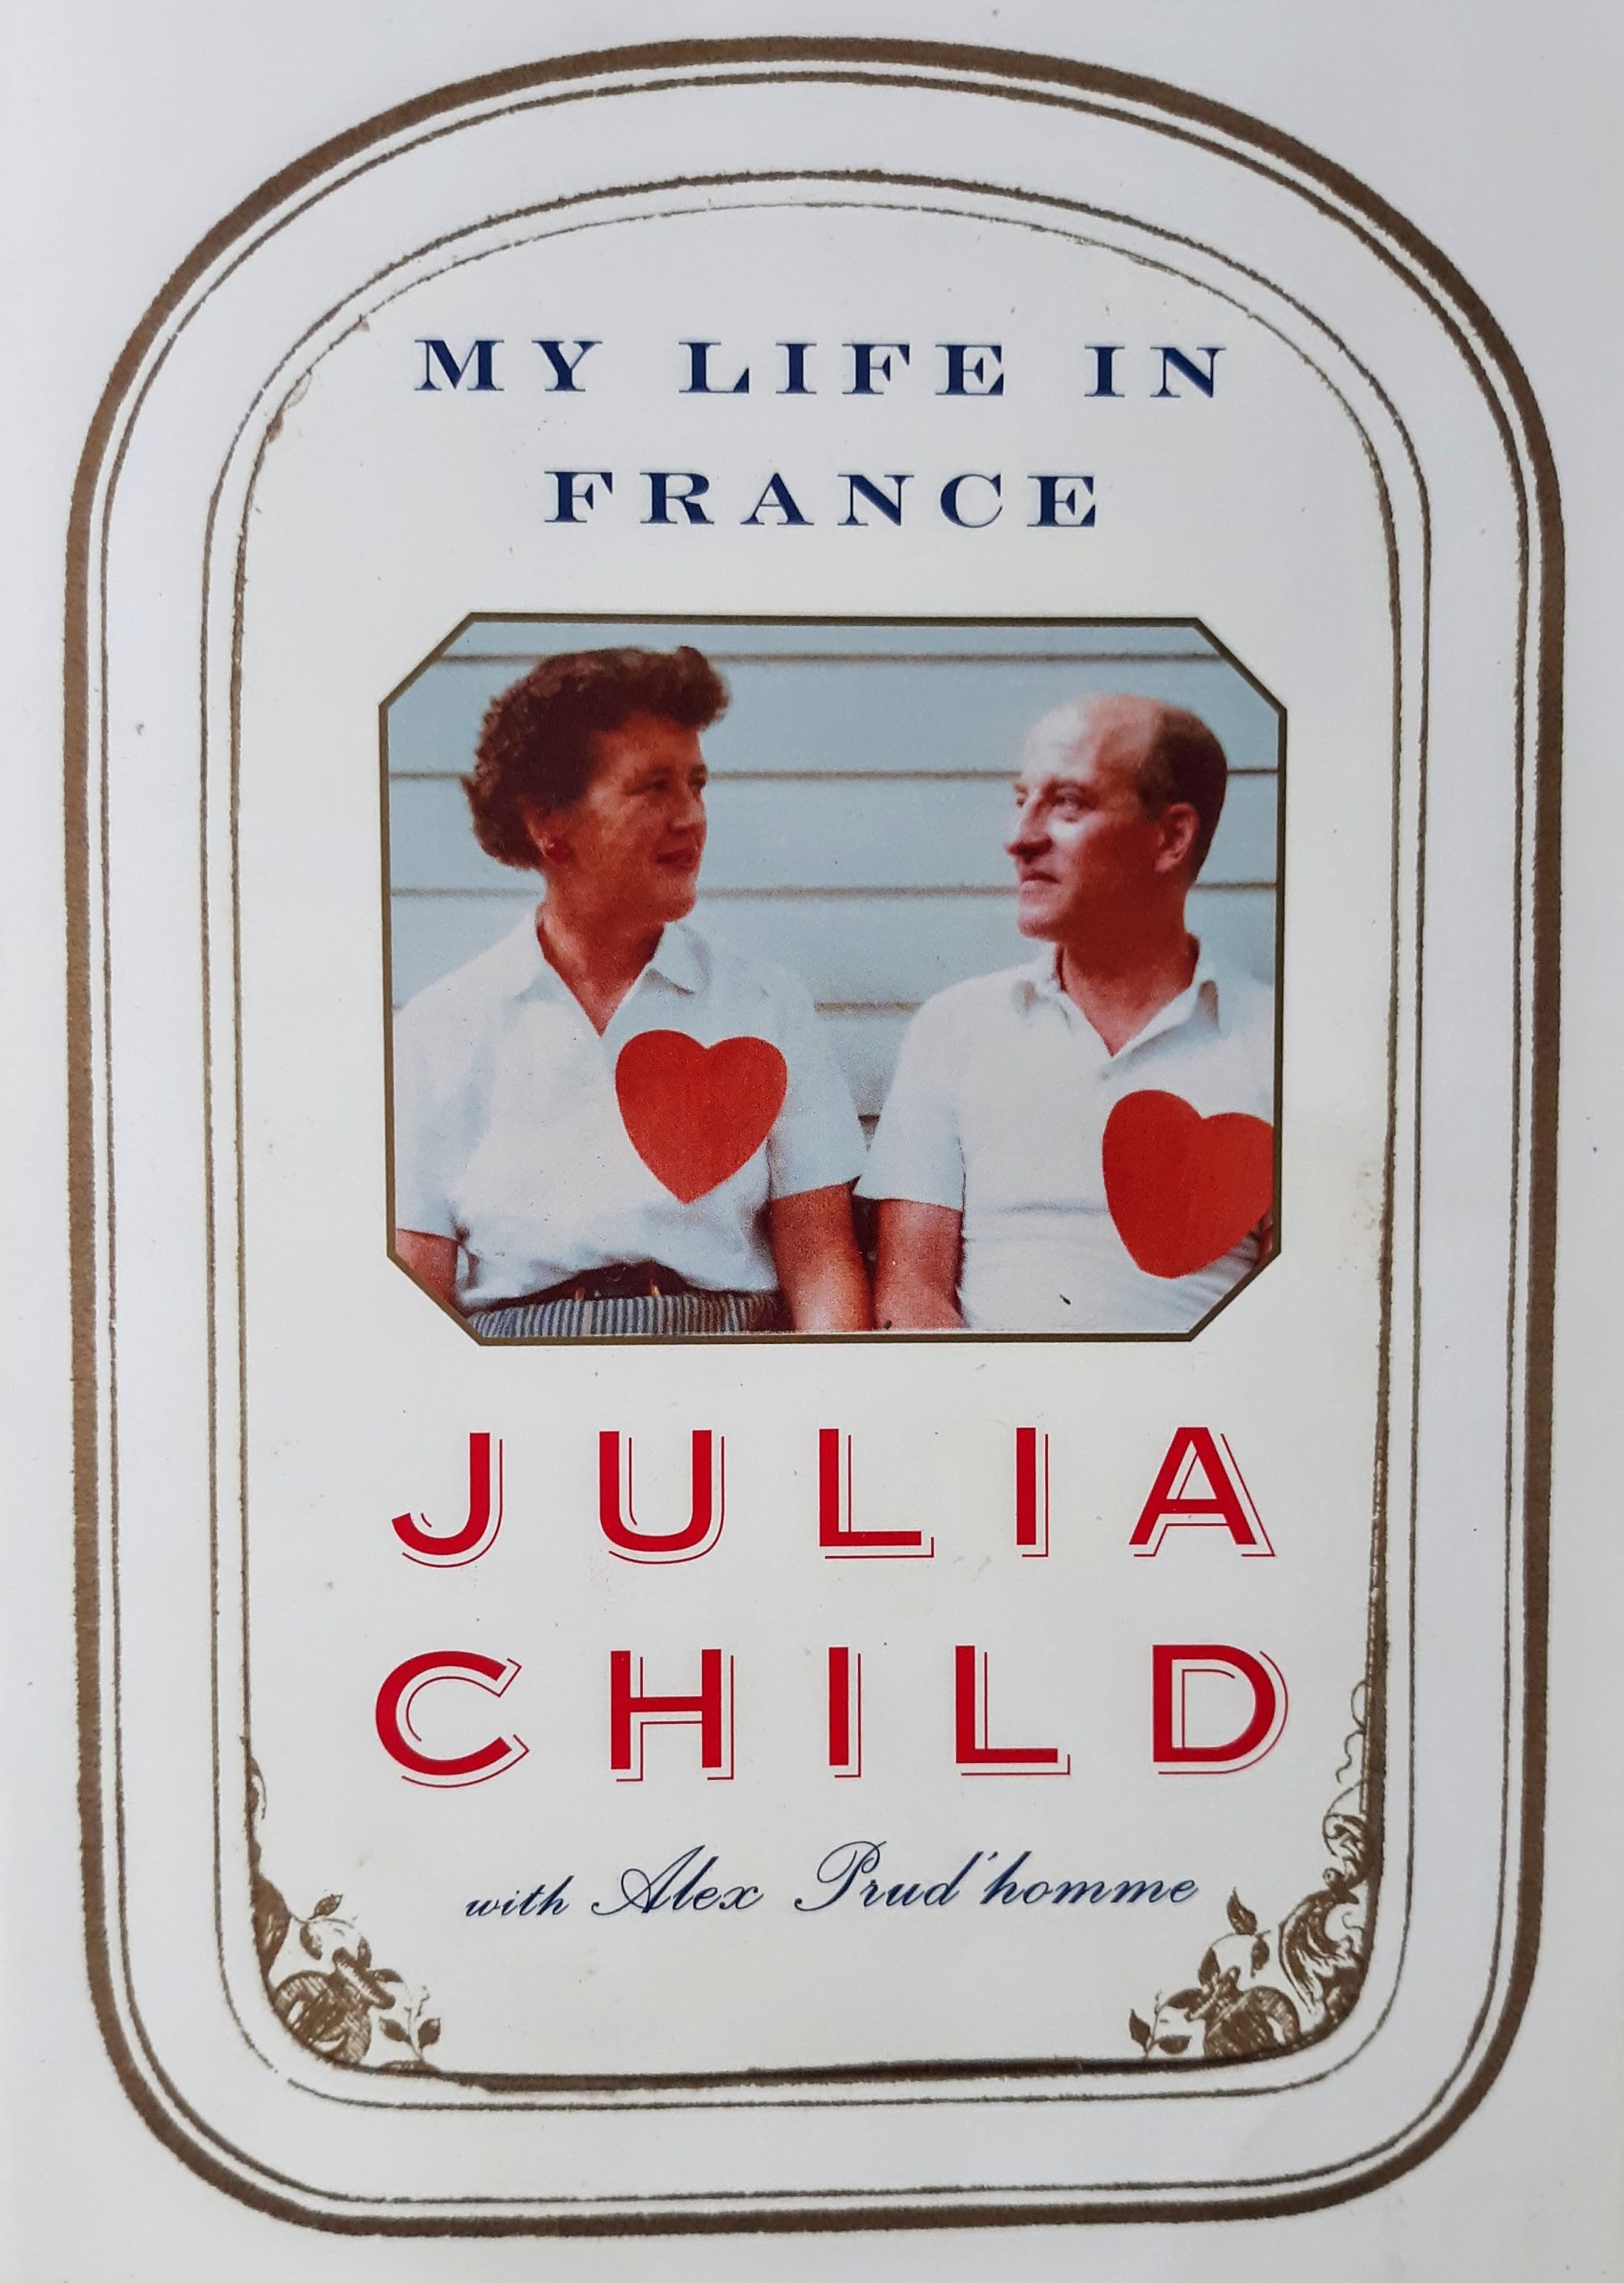 my life in france by julia child book